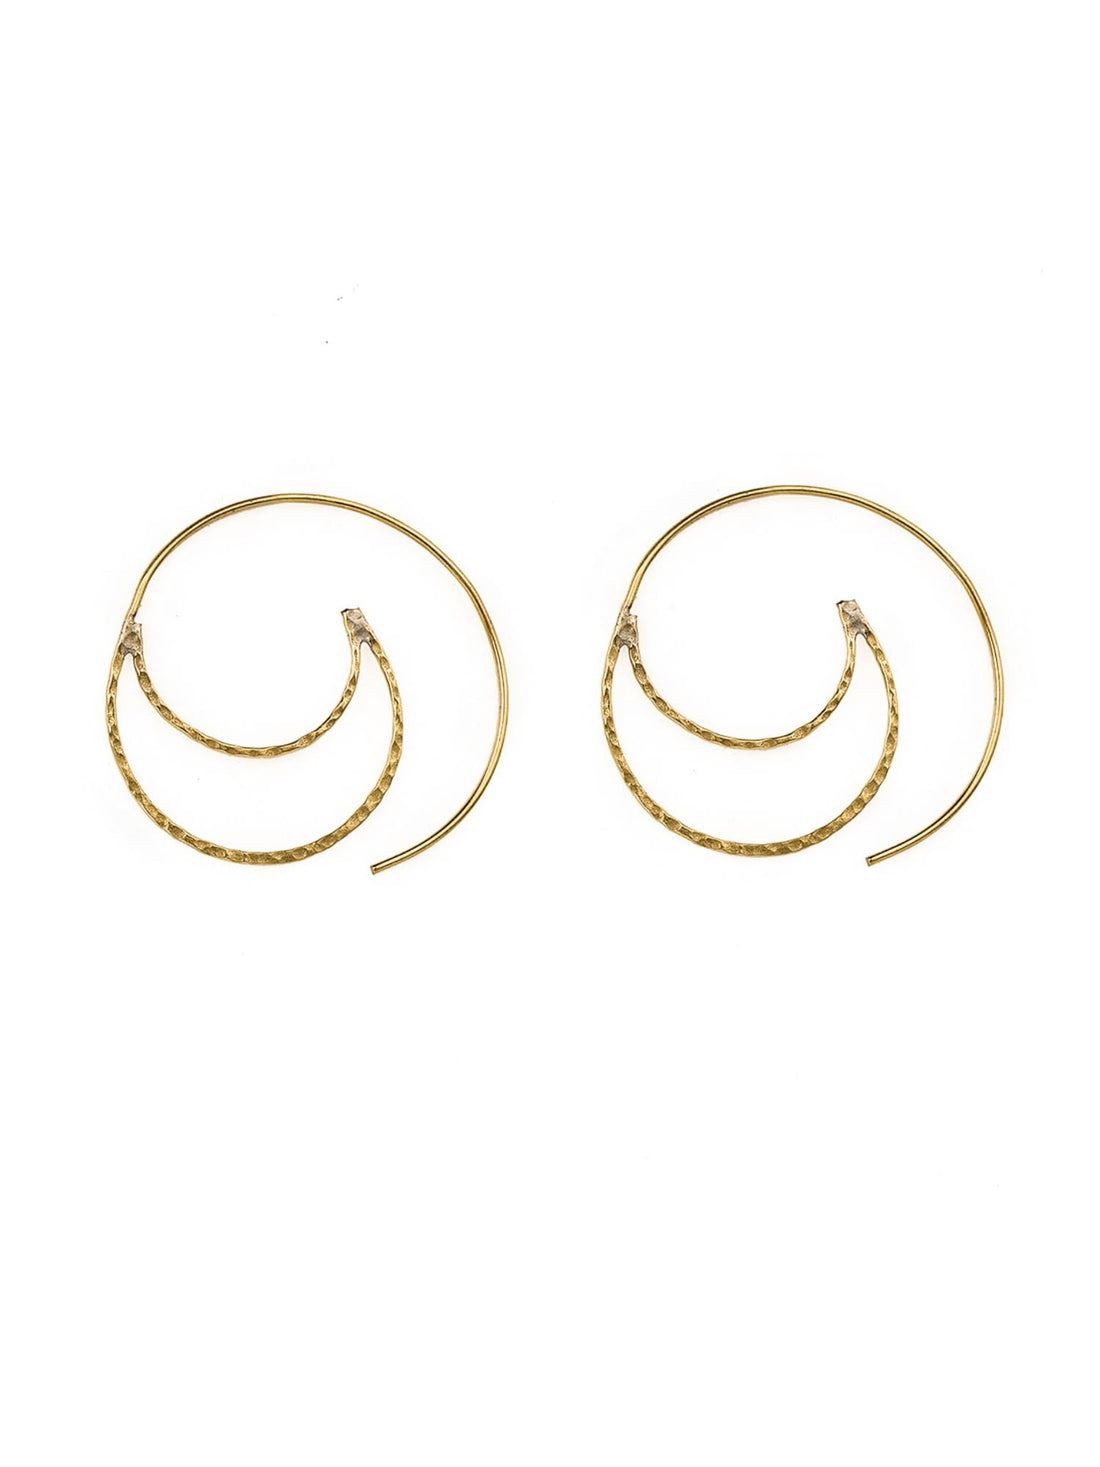 Daily Wear Hoops Earrings - Minimal Gold and Silver-Plated Brass Earrings By Studio One Love